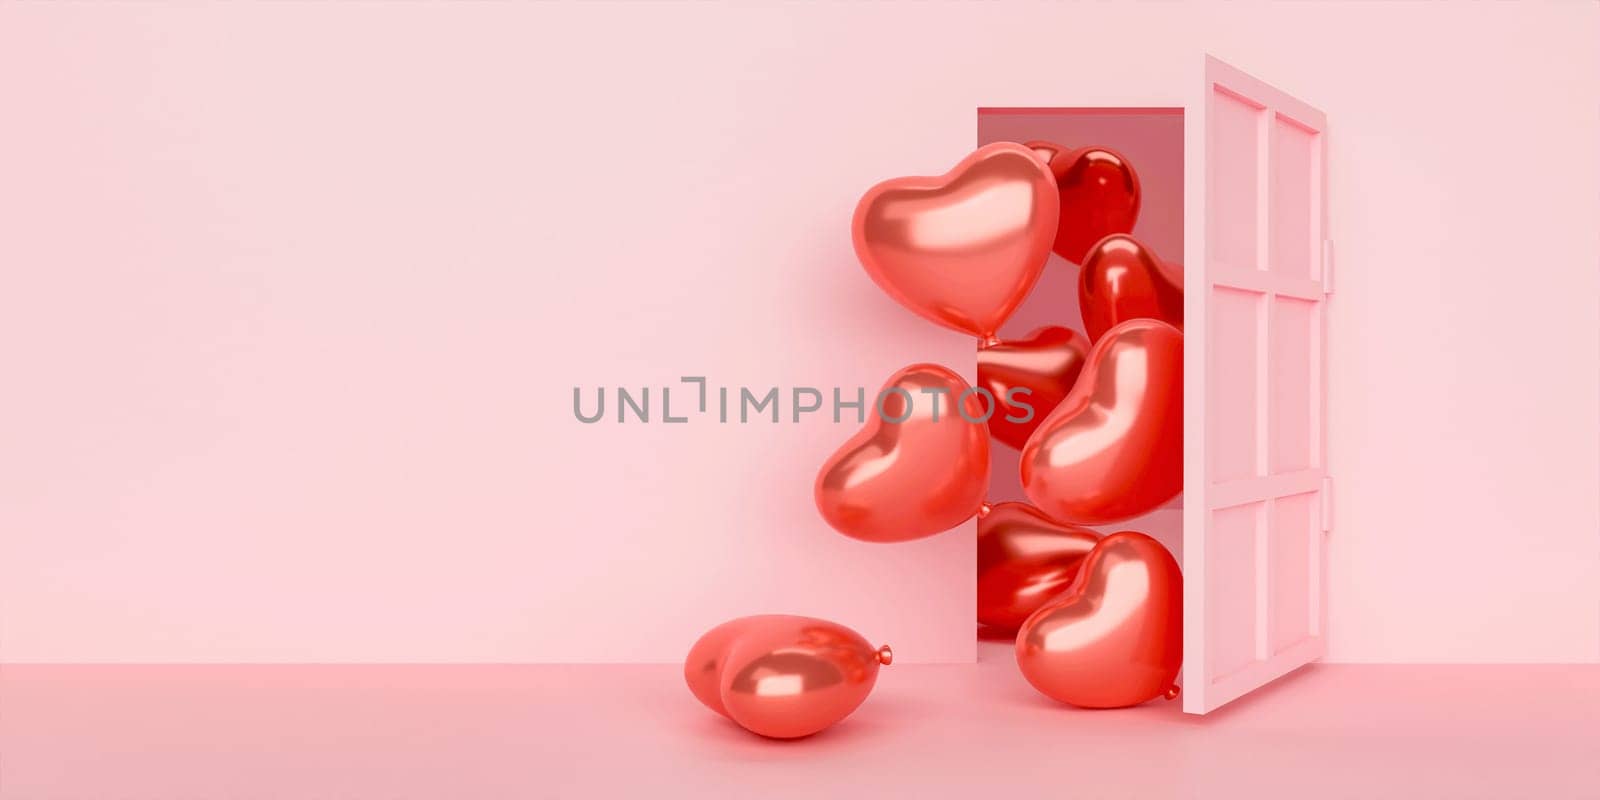 Pink room with open door and red heart shaped balloons entering. concept of valentines arrival, gifts, love, marriage and romantic. 3d rendering illustration by meepiangraphic